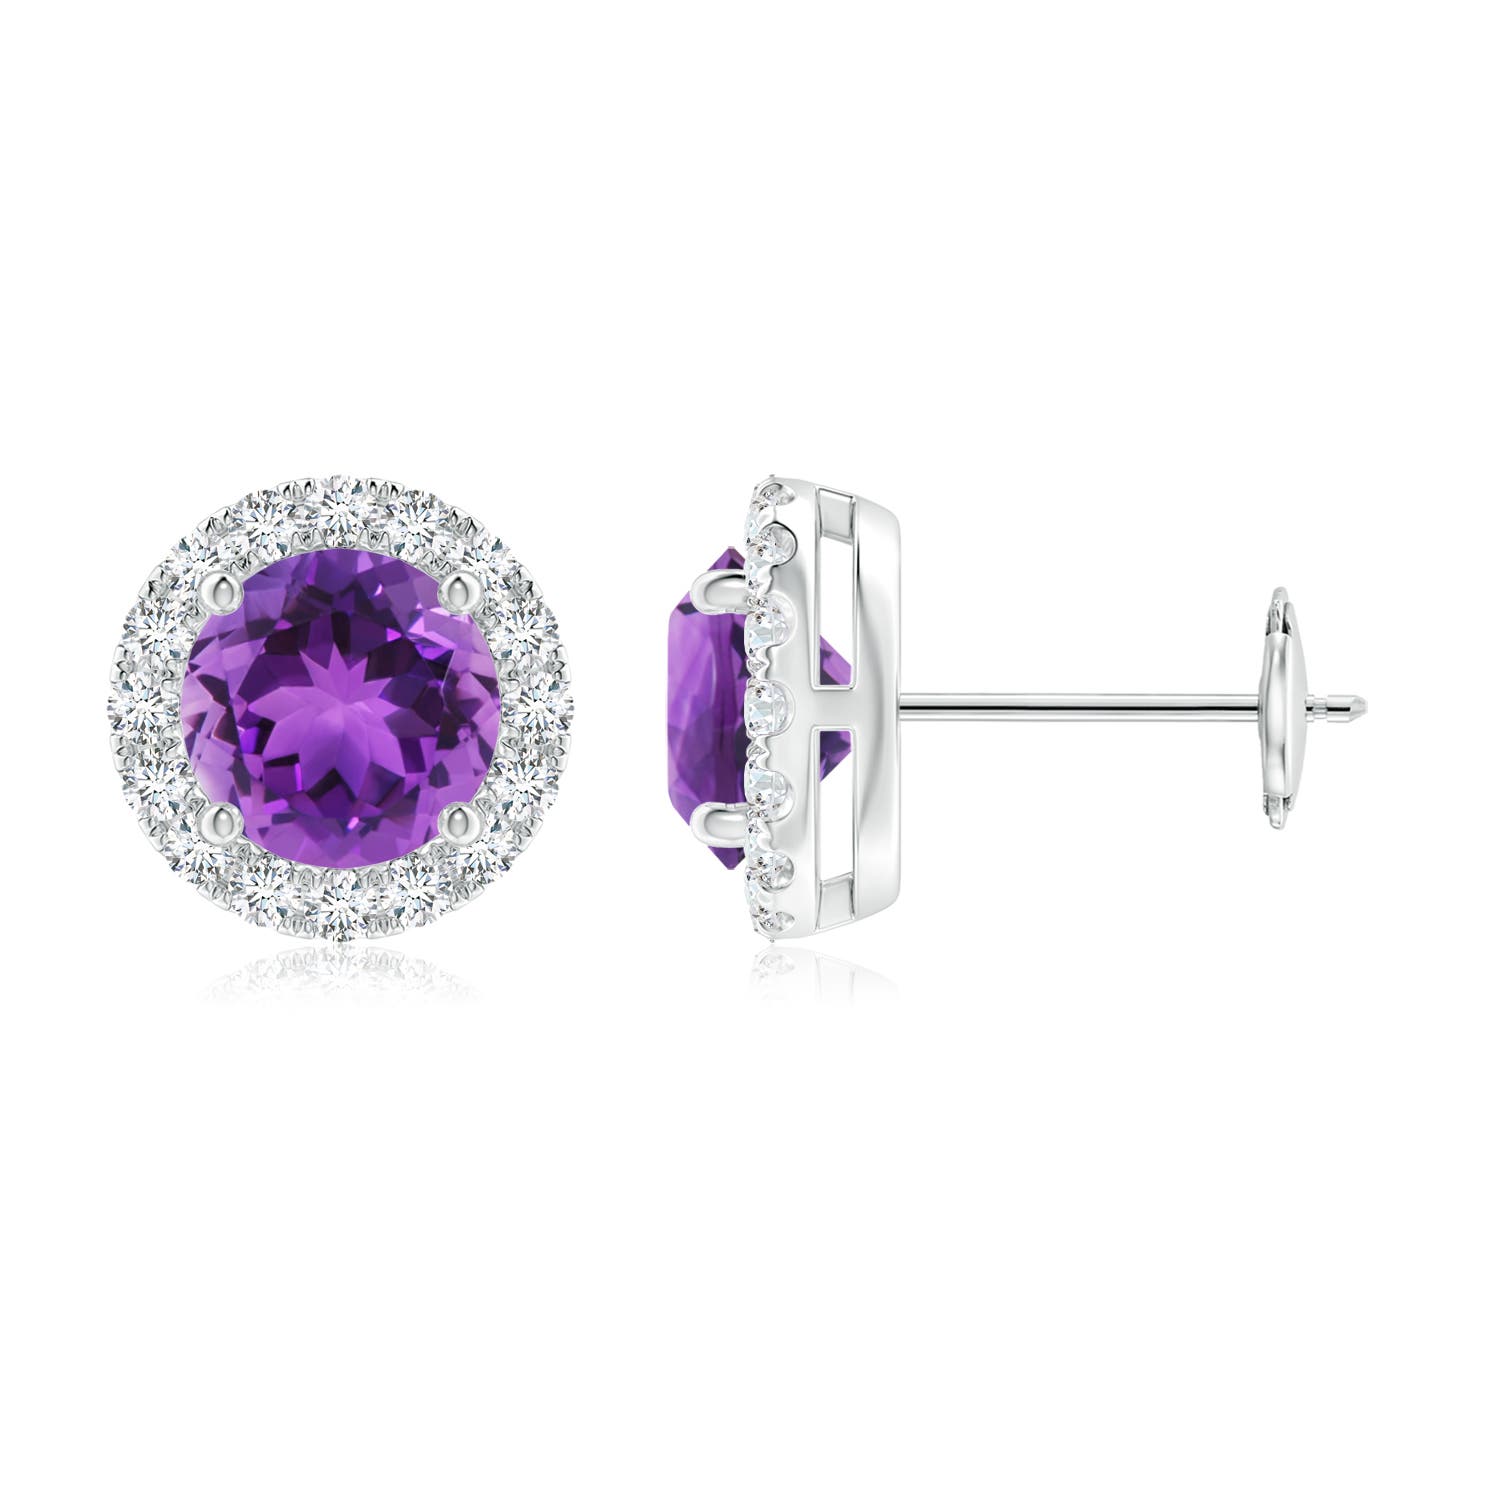 AAA - Amethyst / 1.98 CT / 14 KT White Gold